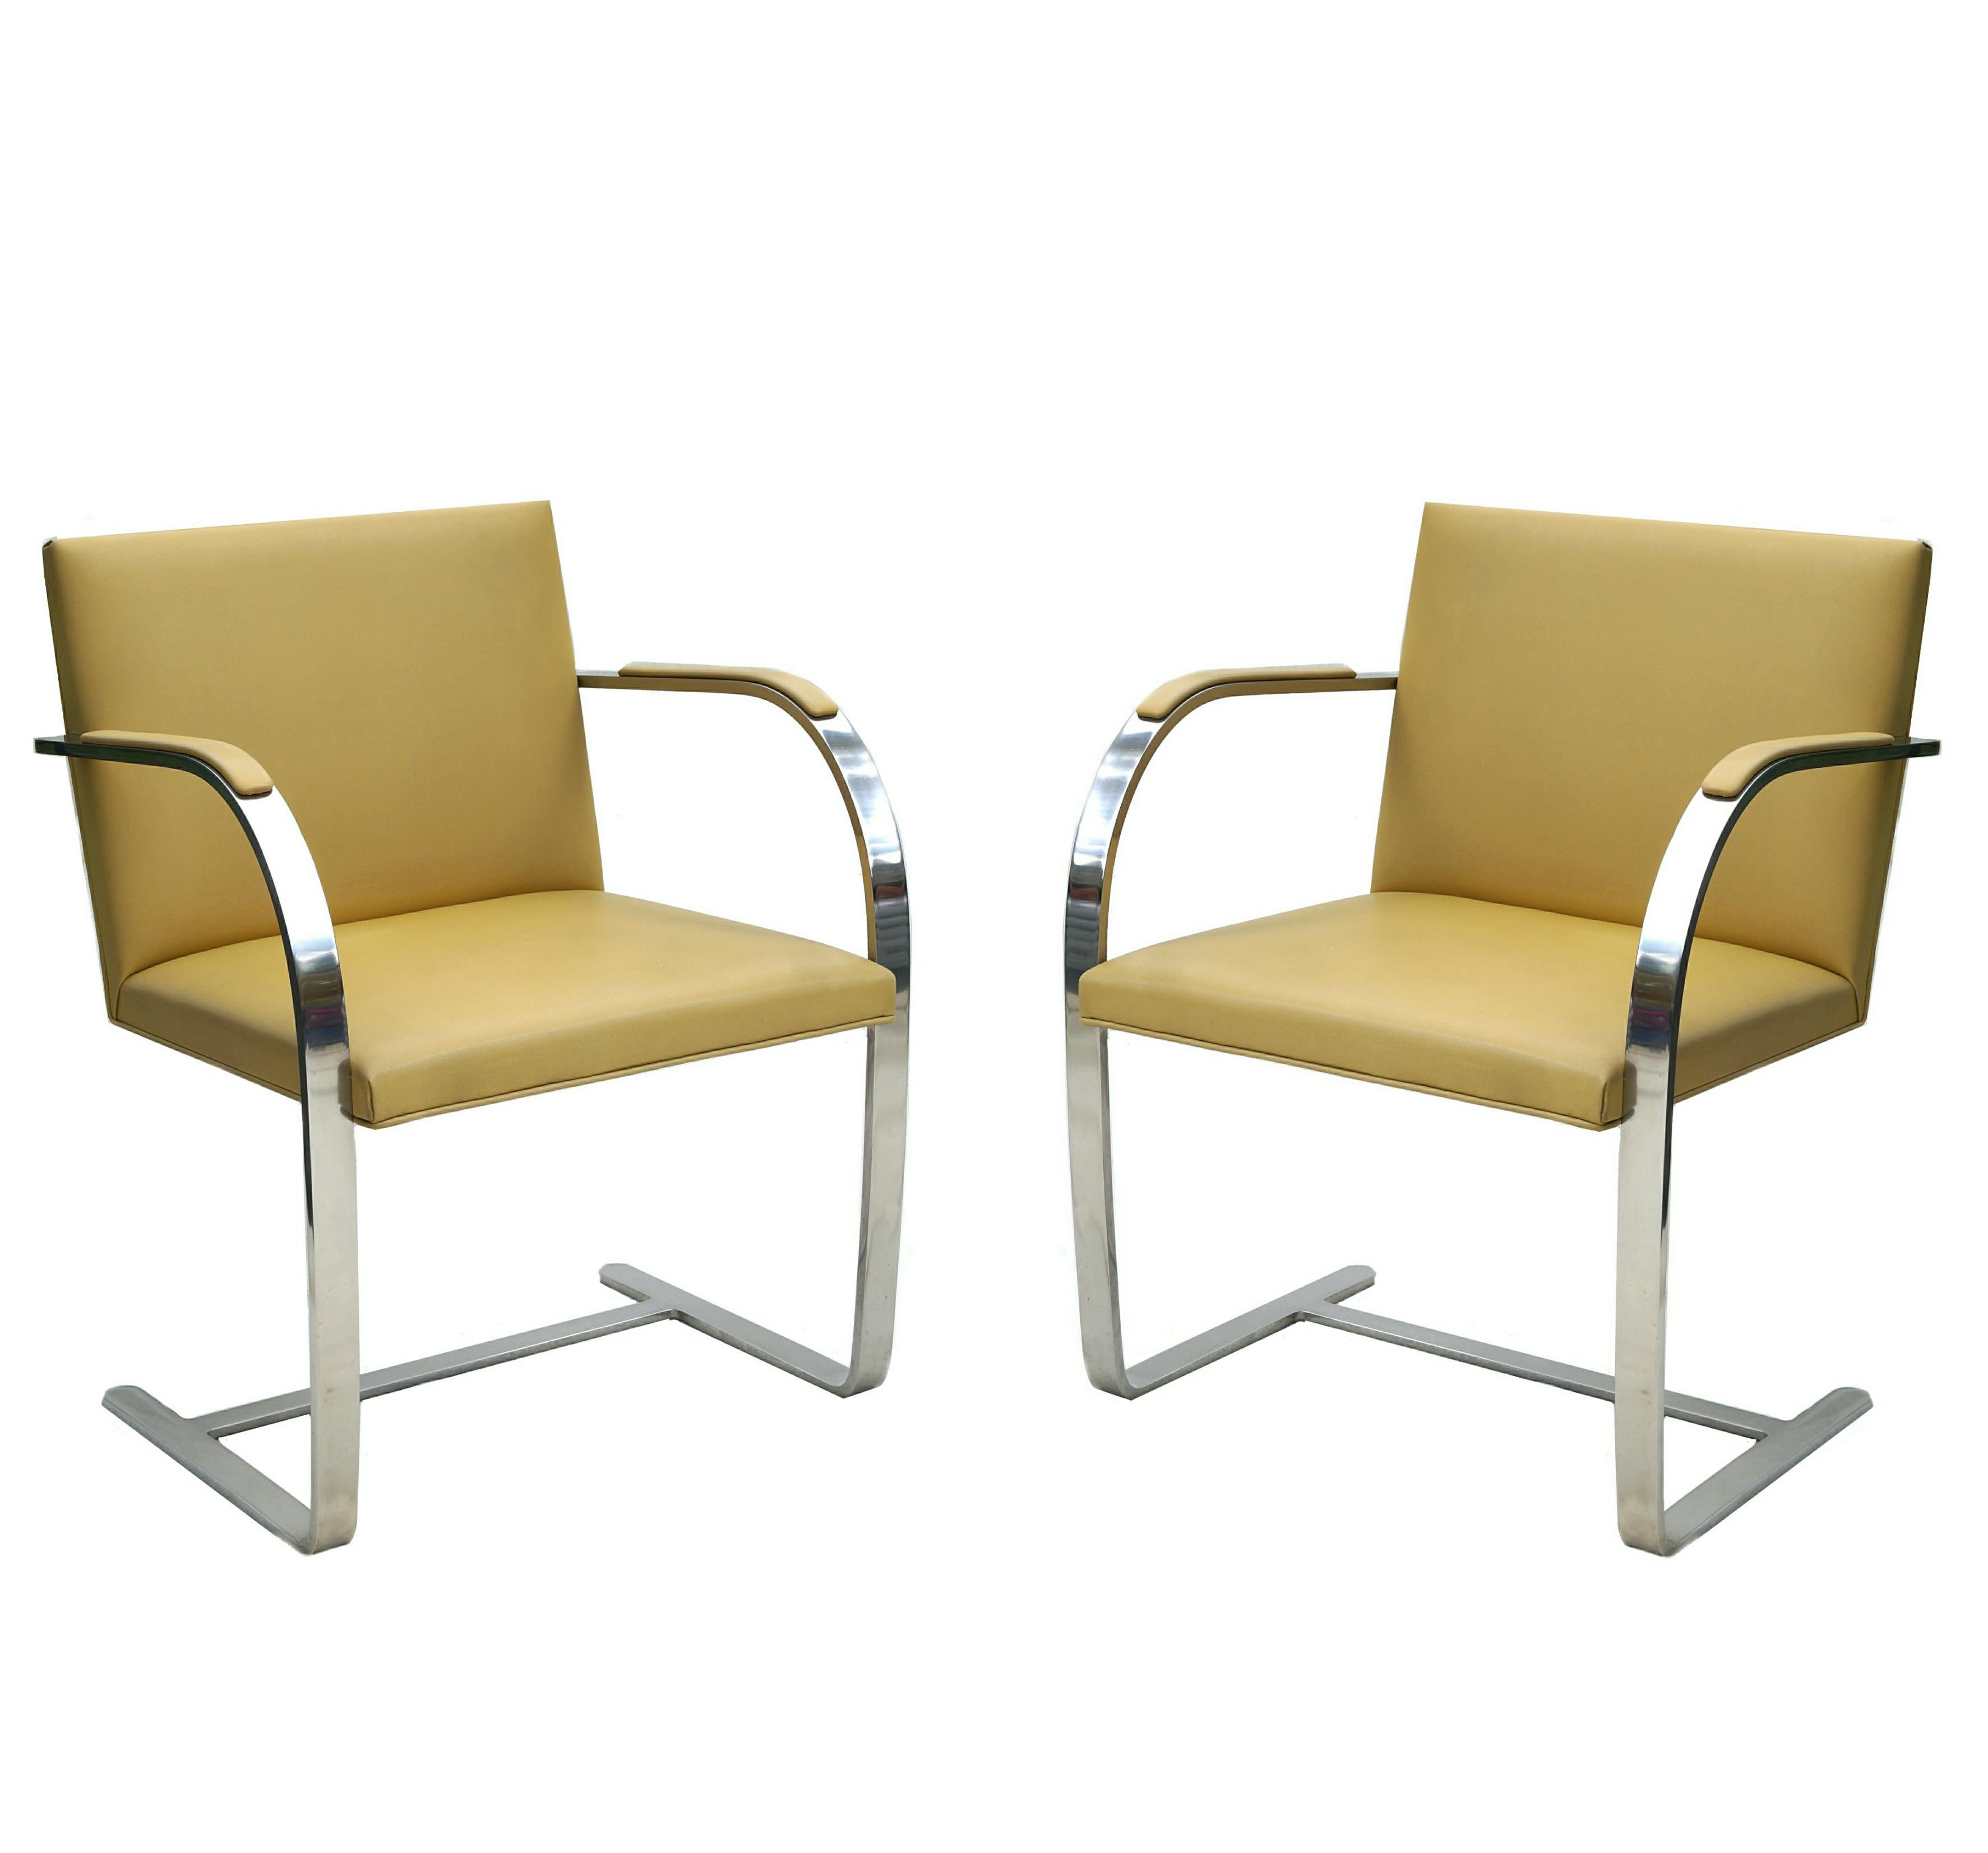 American Pair of Knoll International Ludwig Mies van der Rohe Brno Leather Lounge Chairs For Sale